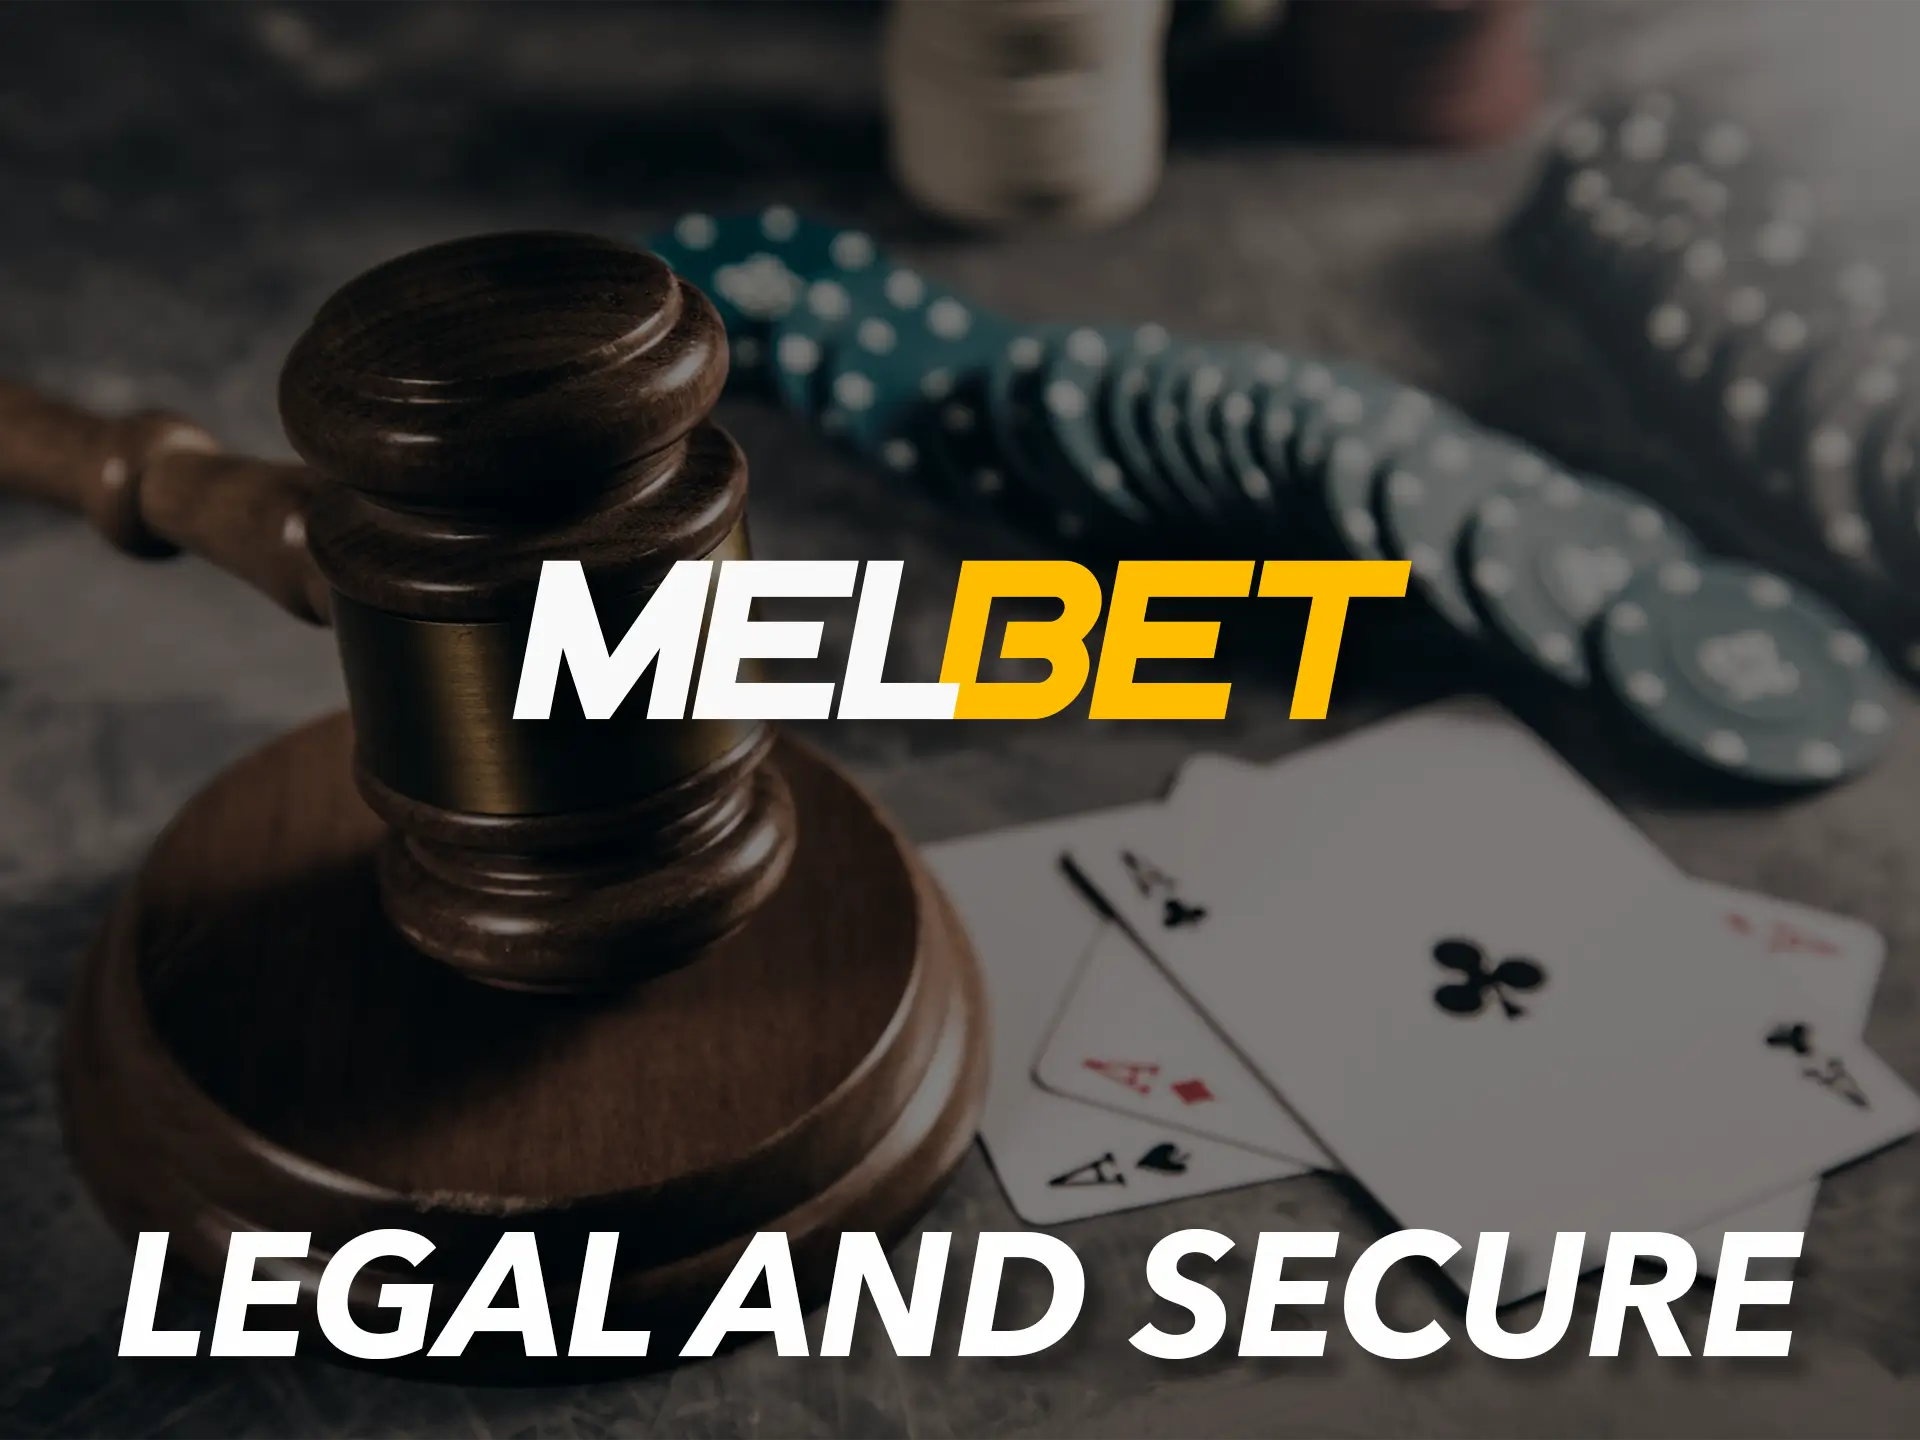 Melbet is a trusted platform with all the necessary licenses.